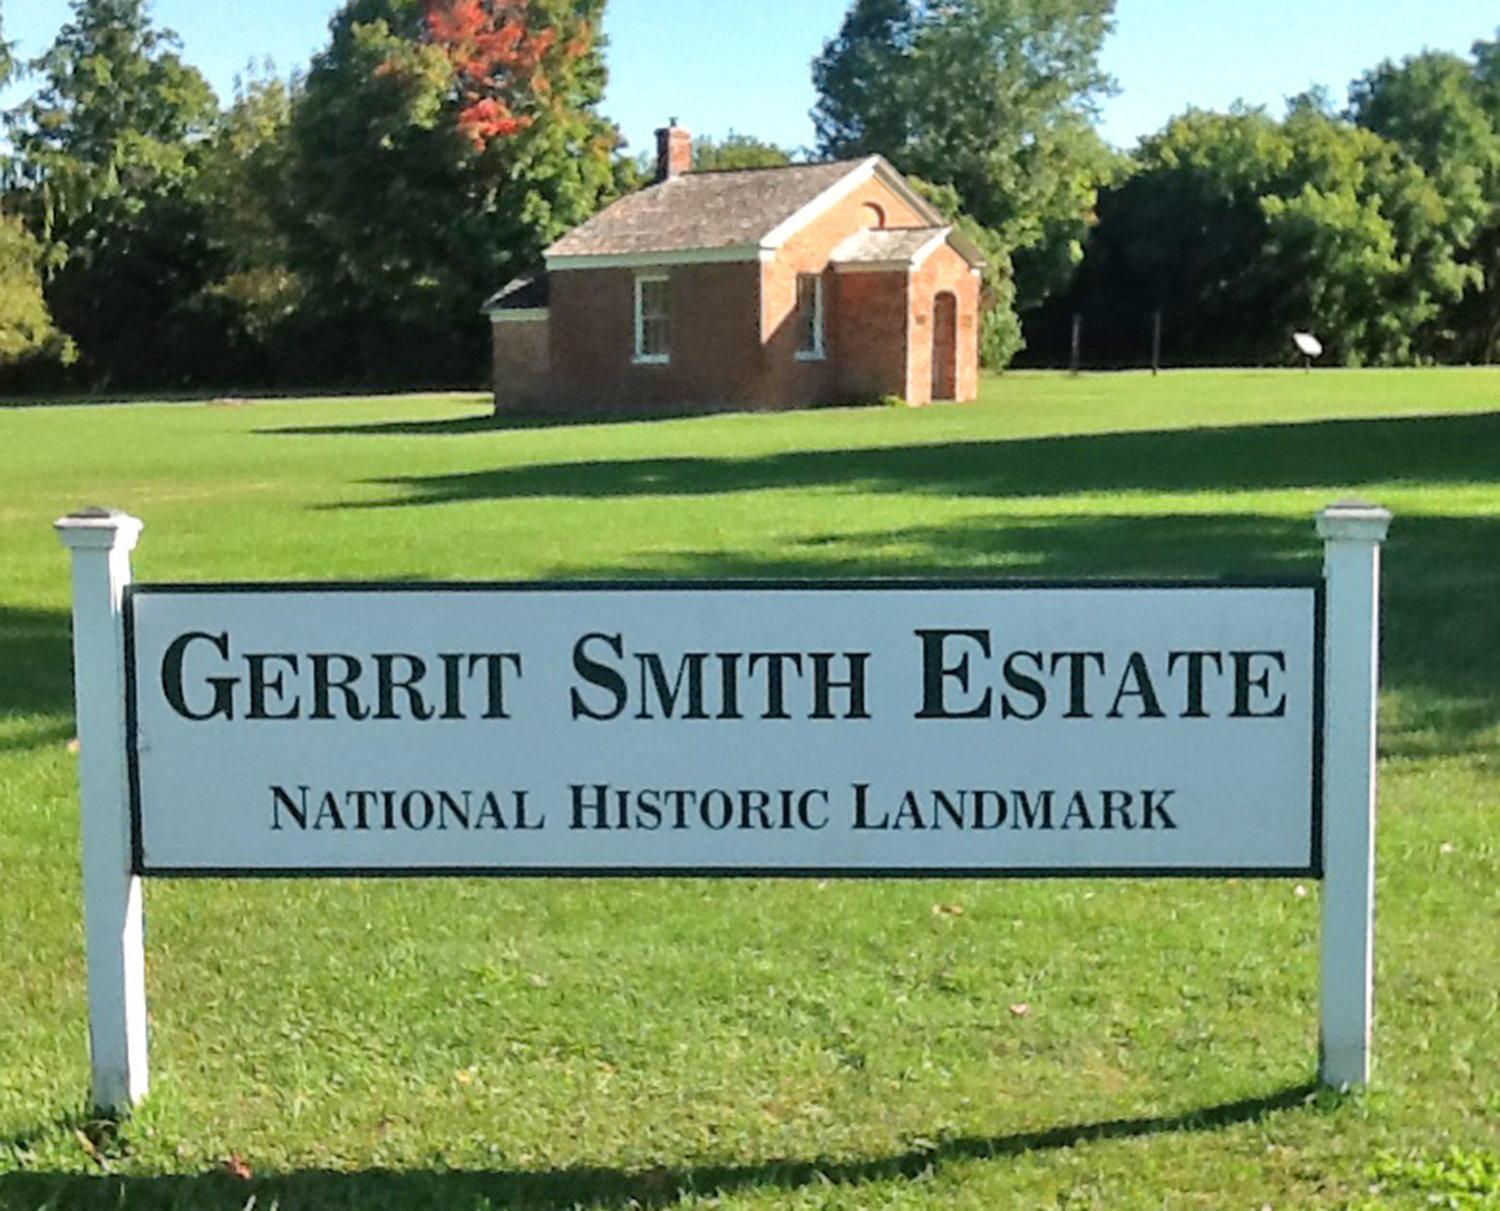 HISTORIC LANDMARK — The Gerrit Smith Estate was the lifetime home and office of Gerrit Smith. Born in 1797, Smith was driven by his progressive ideals and empowered by his wealth to champion the abolition cause.